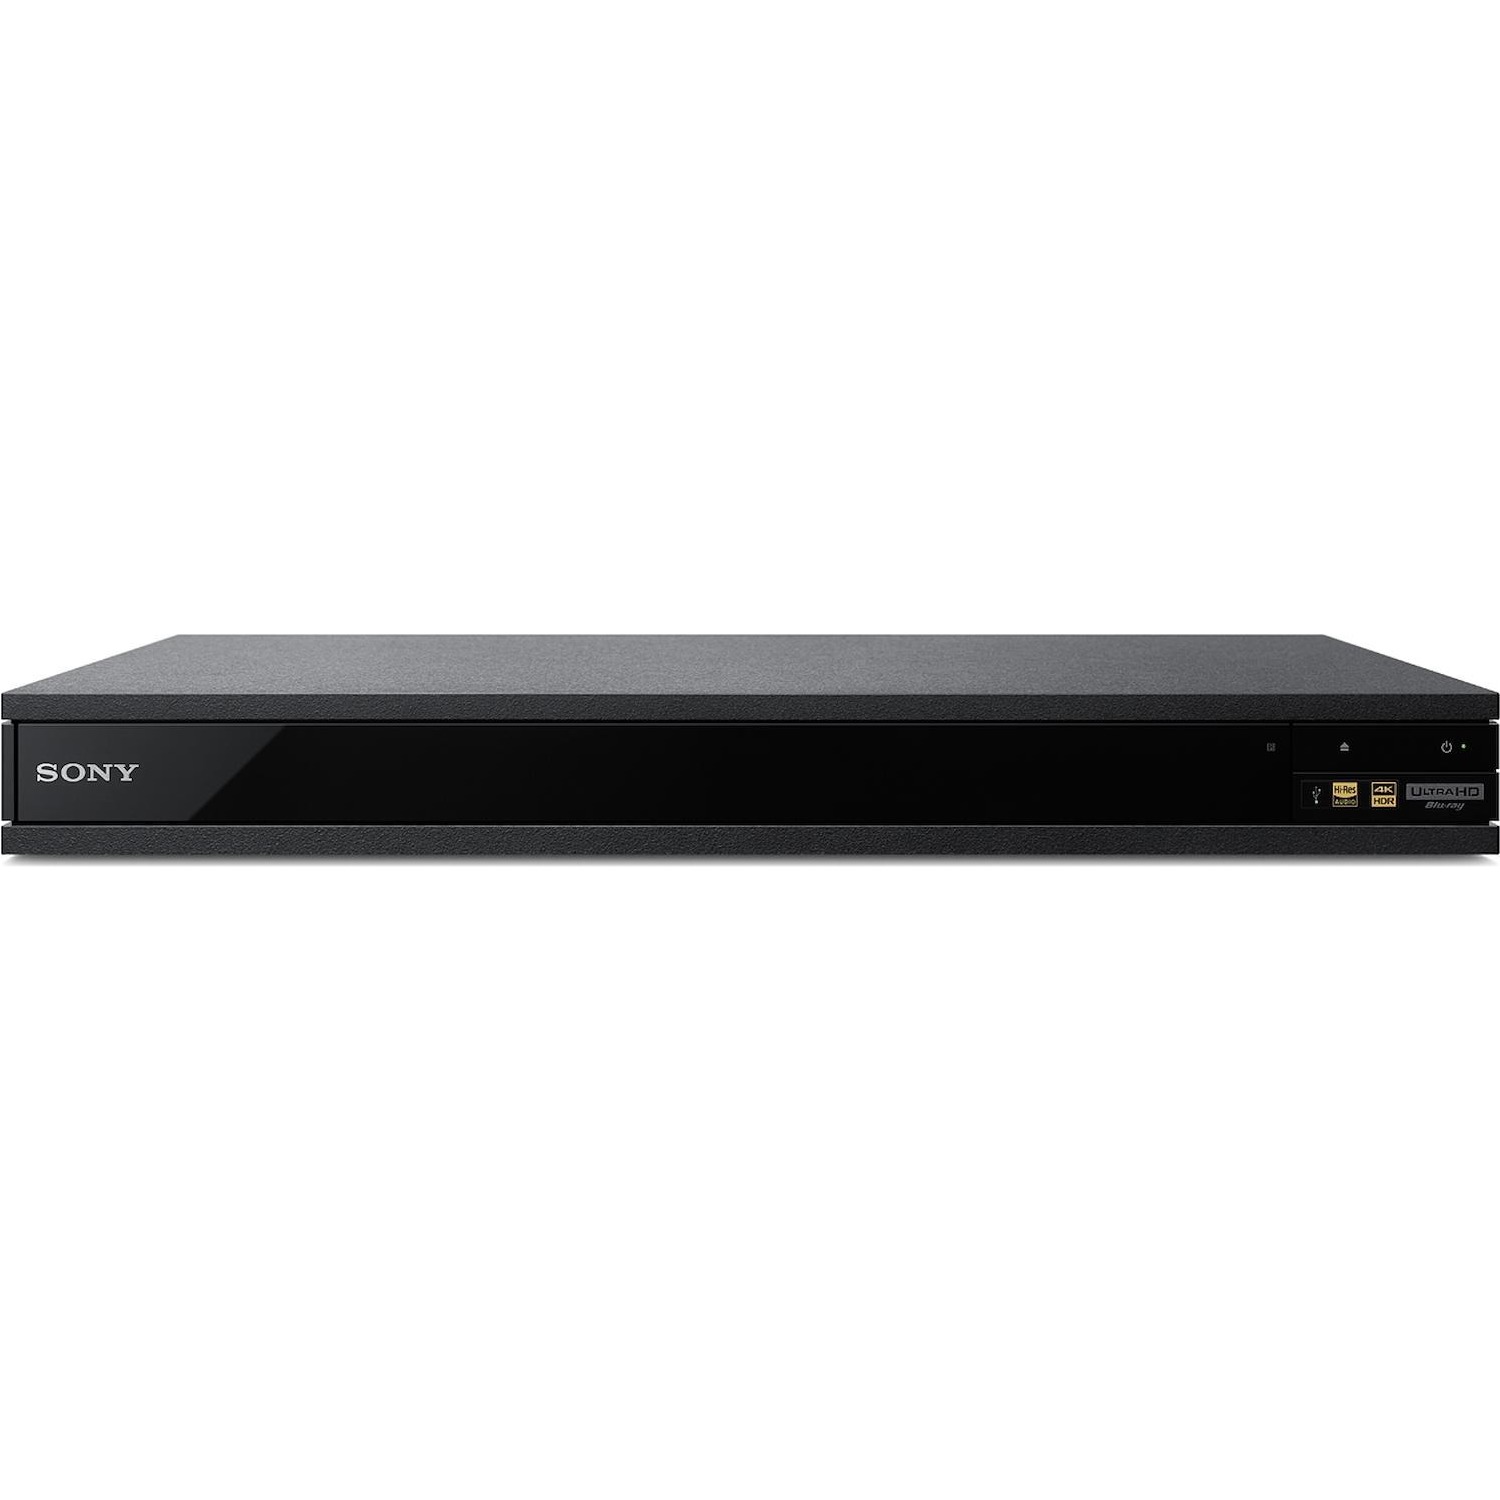 Image of Sony UBP-X800M2 lettore Blu-ray Disc 4K Ultra HD